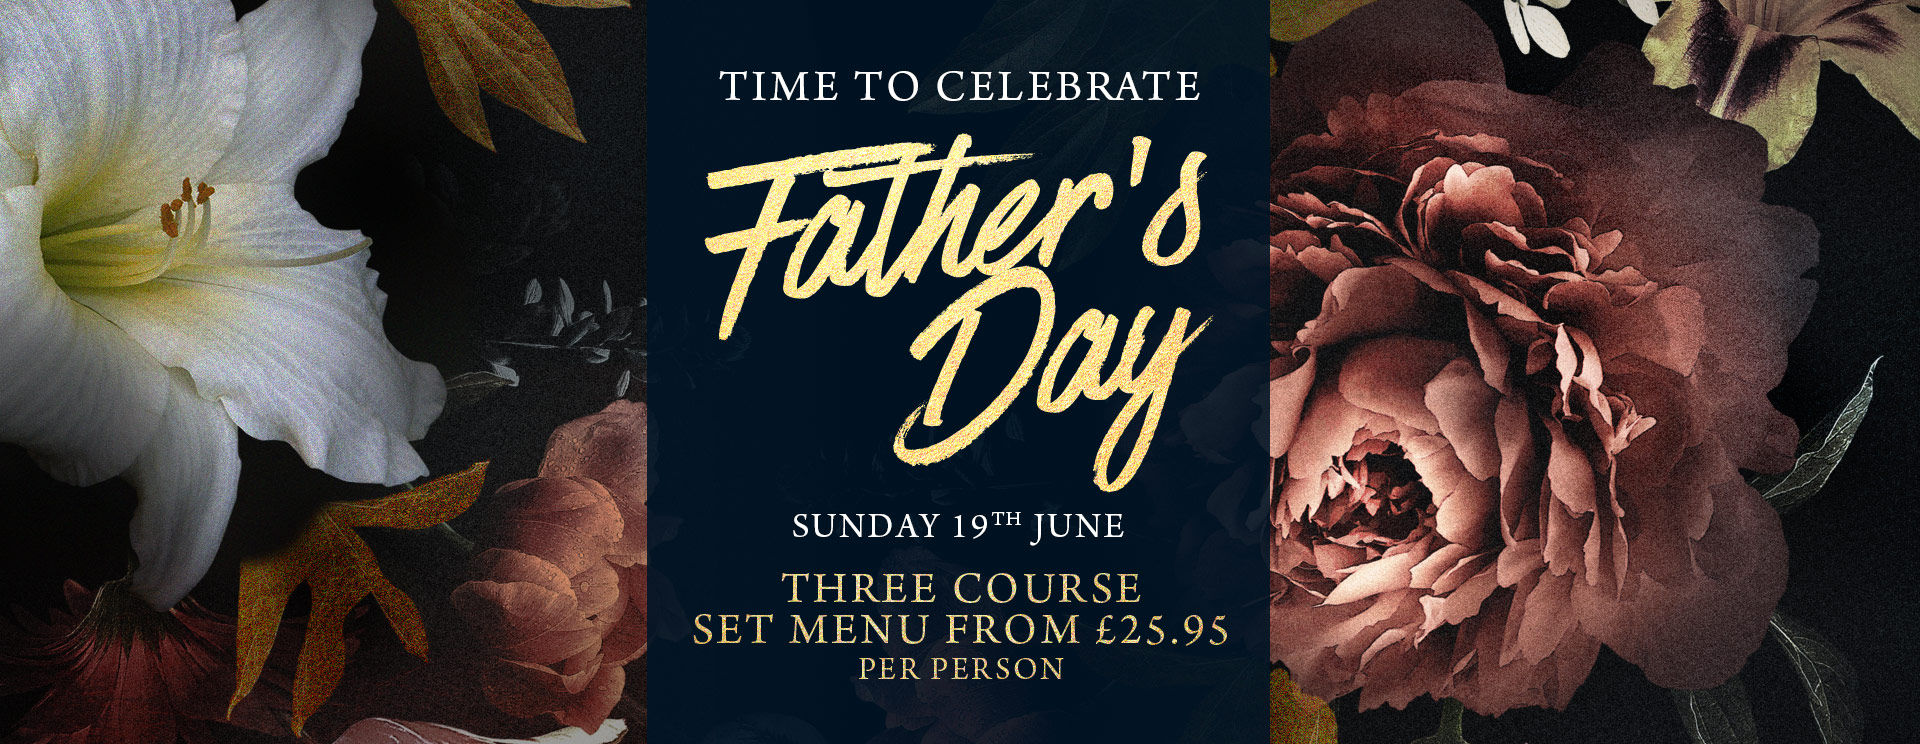 Fathers Day at The Sheep Heid Inn